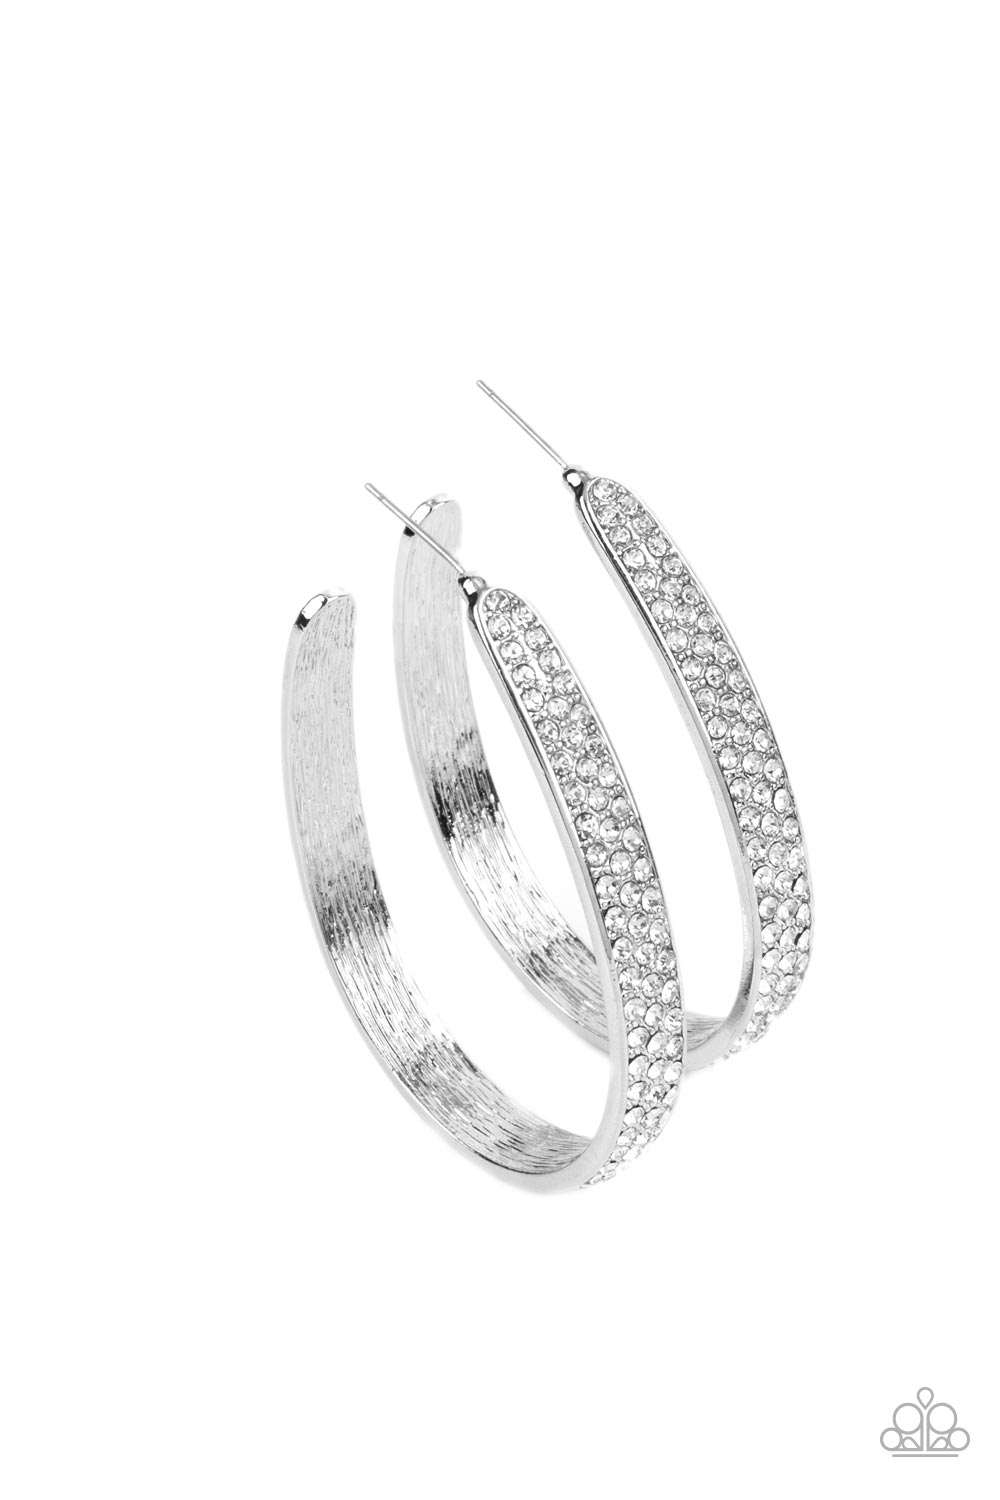 Bossy and Glossy White Hoop Earring - Paparazzi Accessories  Item #P5HO-WTXX-104XX Row after row of glassy white rhinestones are encrusted across the front of a textured silver hoop, creating a stunningly sparkly centerpiece. Earring attaches to a standard post fitting. Hoop measures approximately 1 1/2" in diameter.  Sold as one pair of hoop earrings.